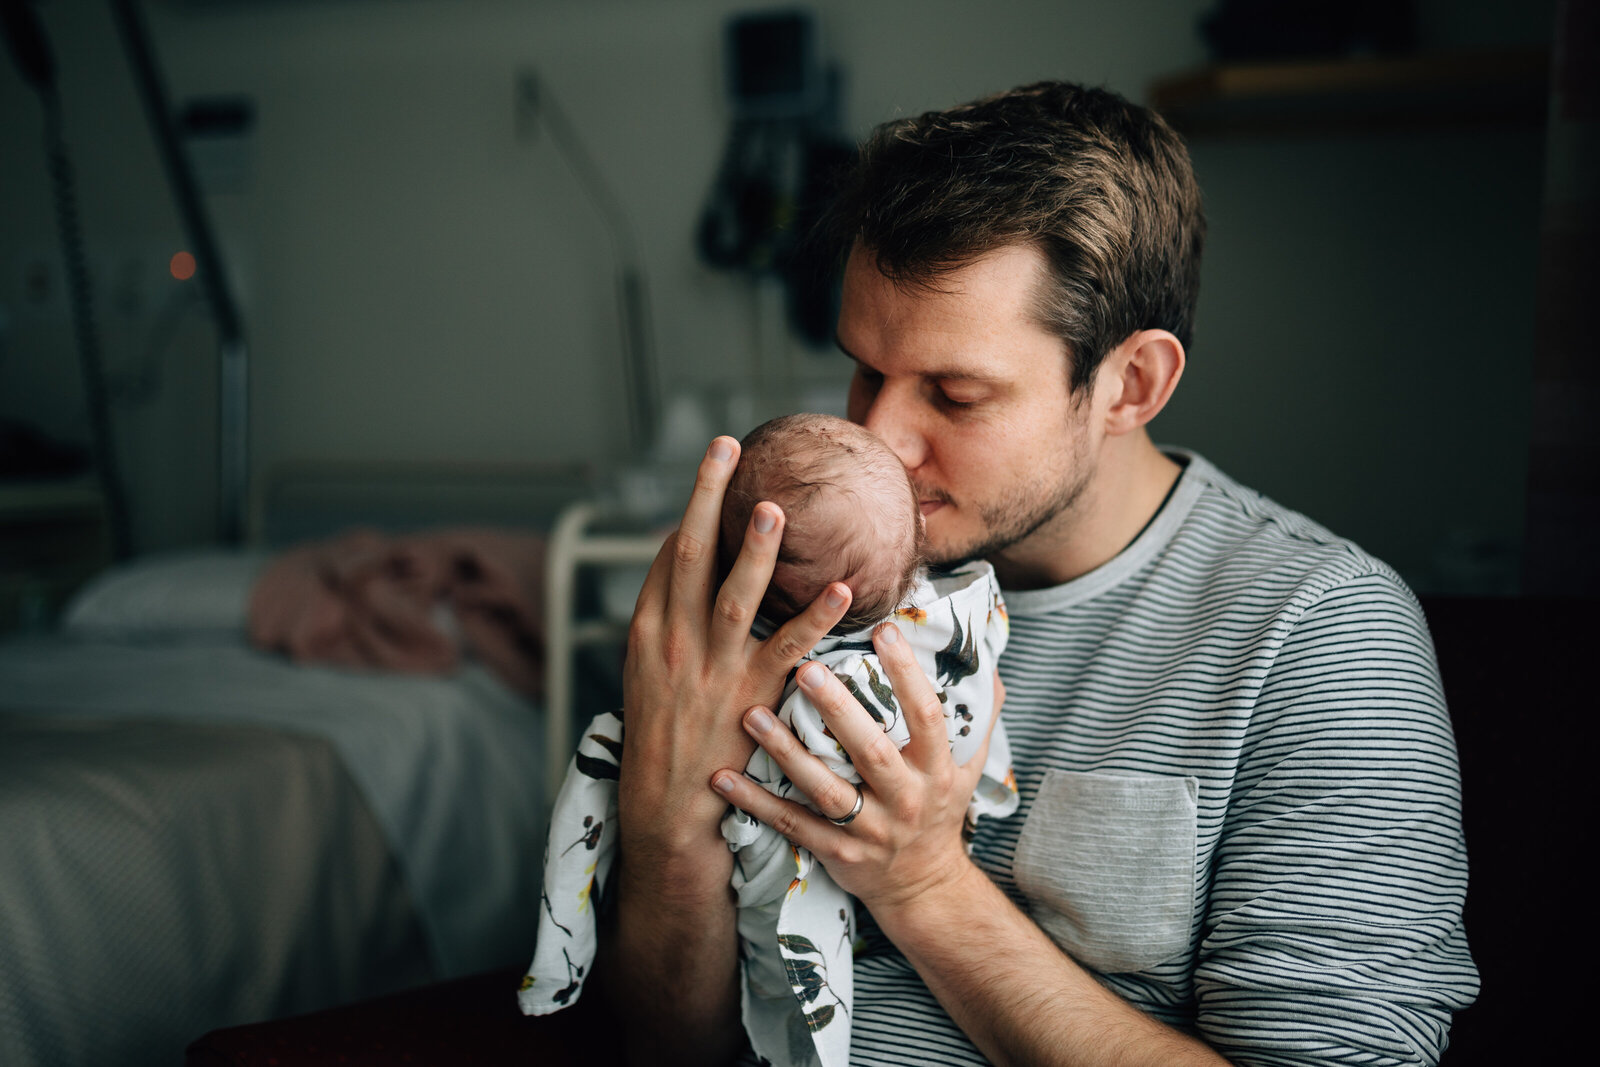 dad in hospital room lifting baby up to smell and kiss her, fresh 48 photography melbourne